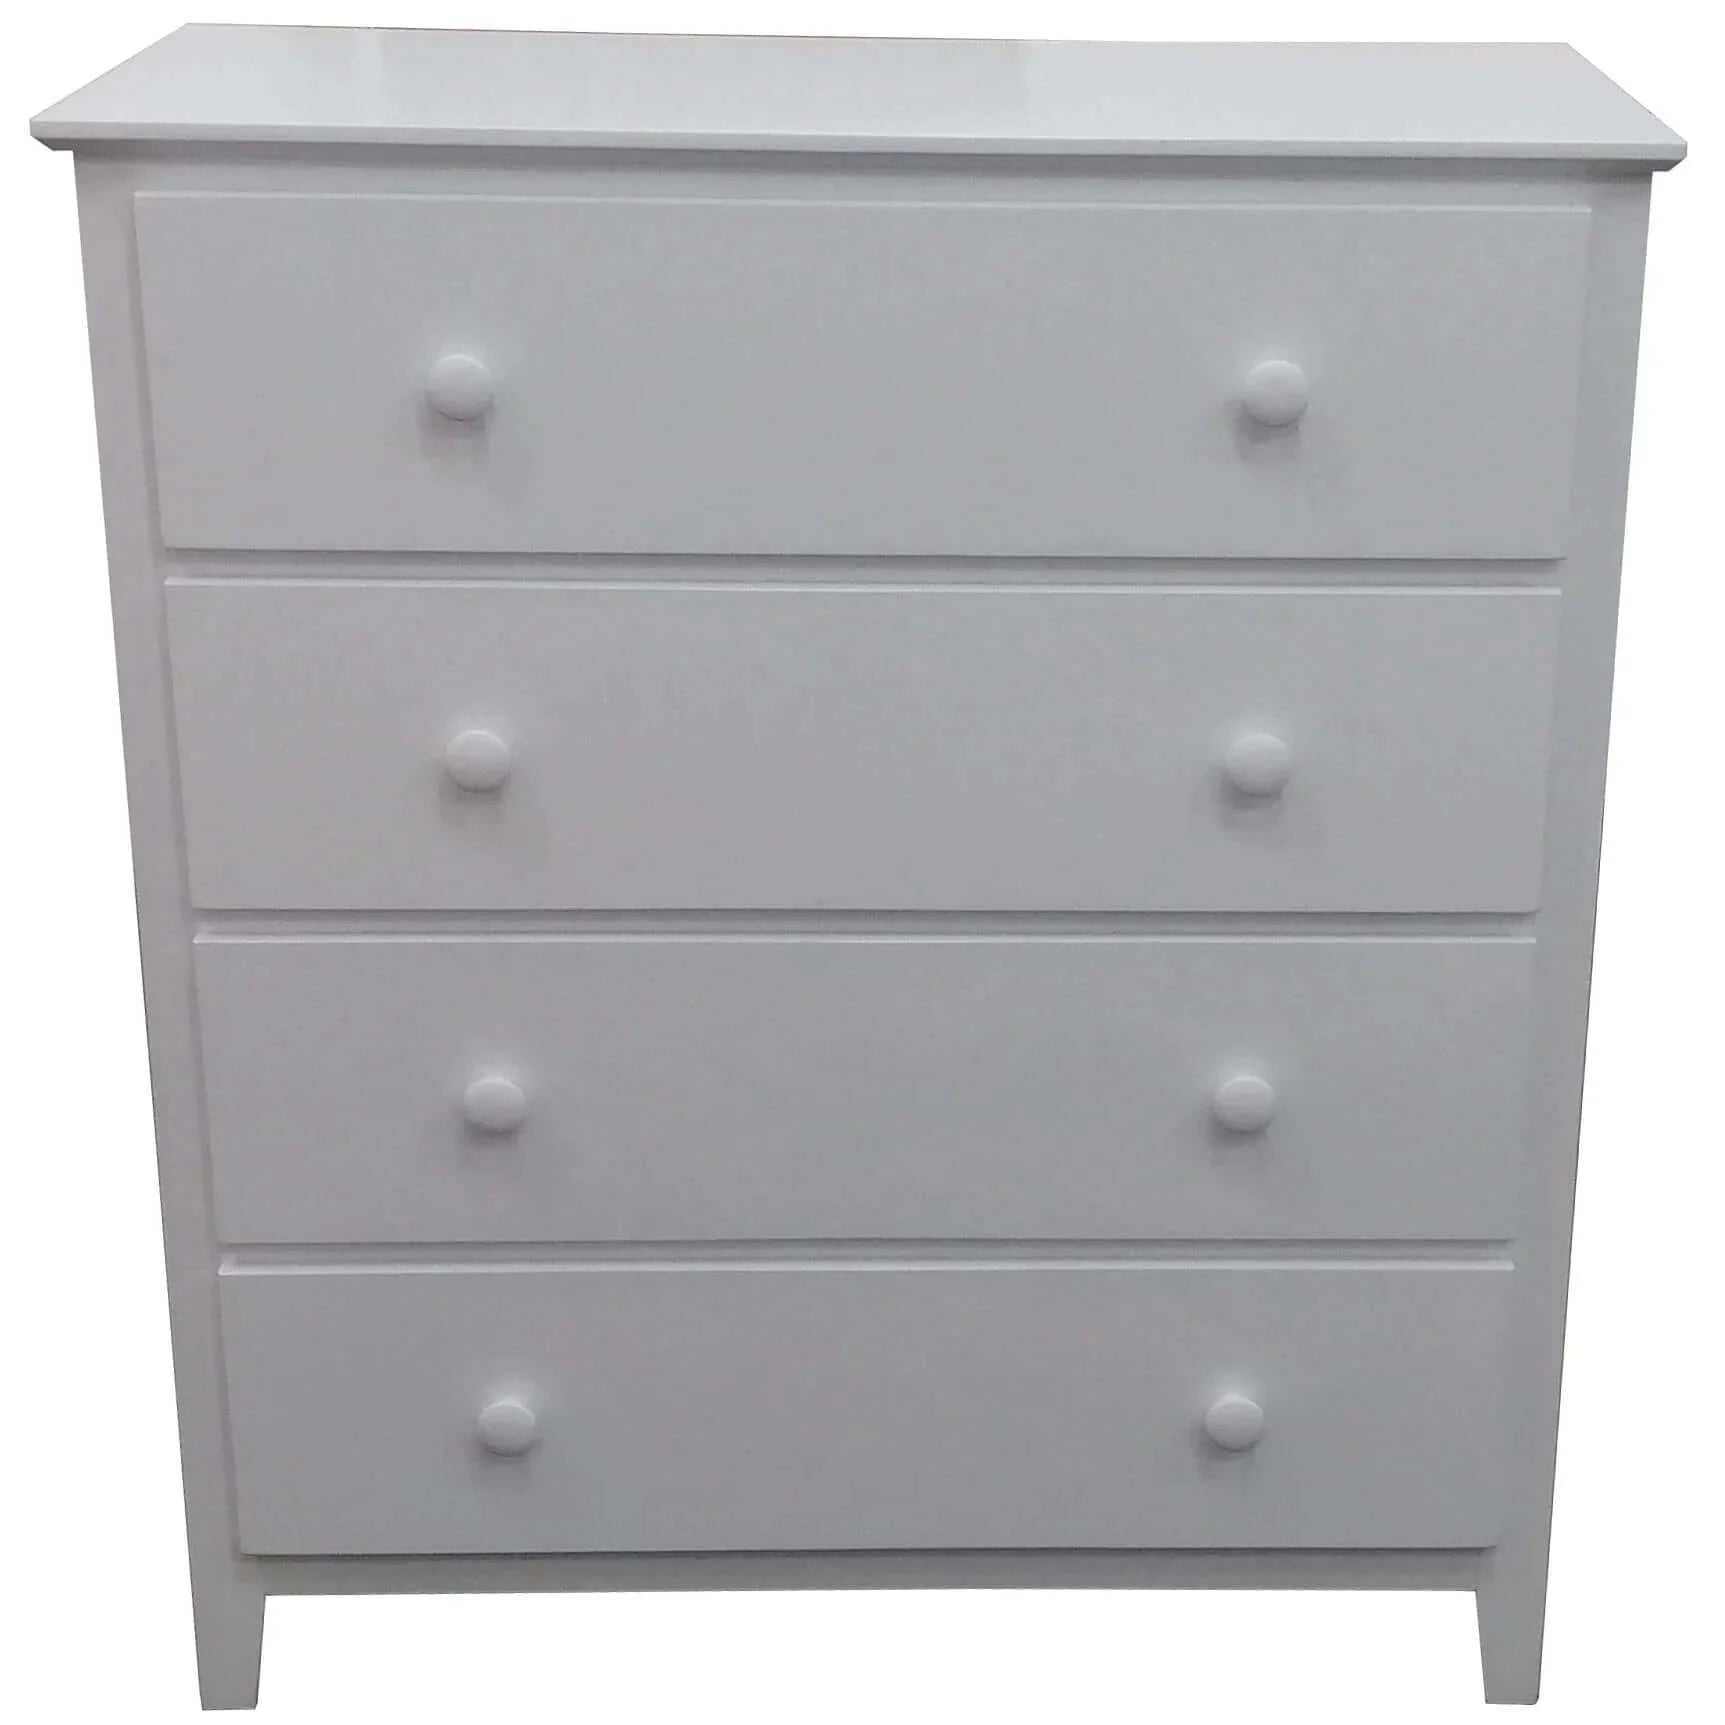 Buy wisteria bedside tallboy 3pc bedroom set drawers nightstand storage cabinet -wht - upinteriors-Upinteriors